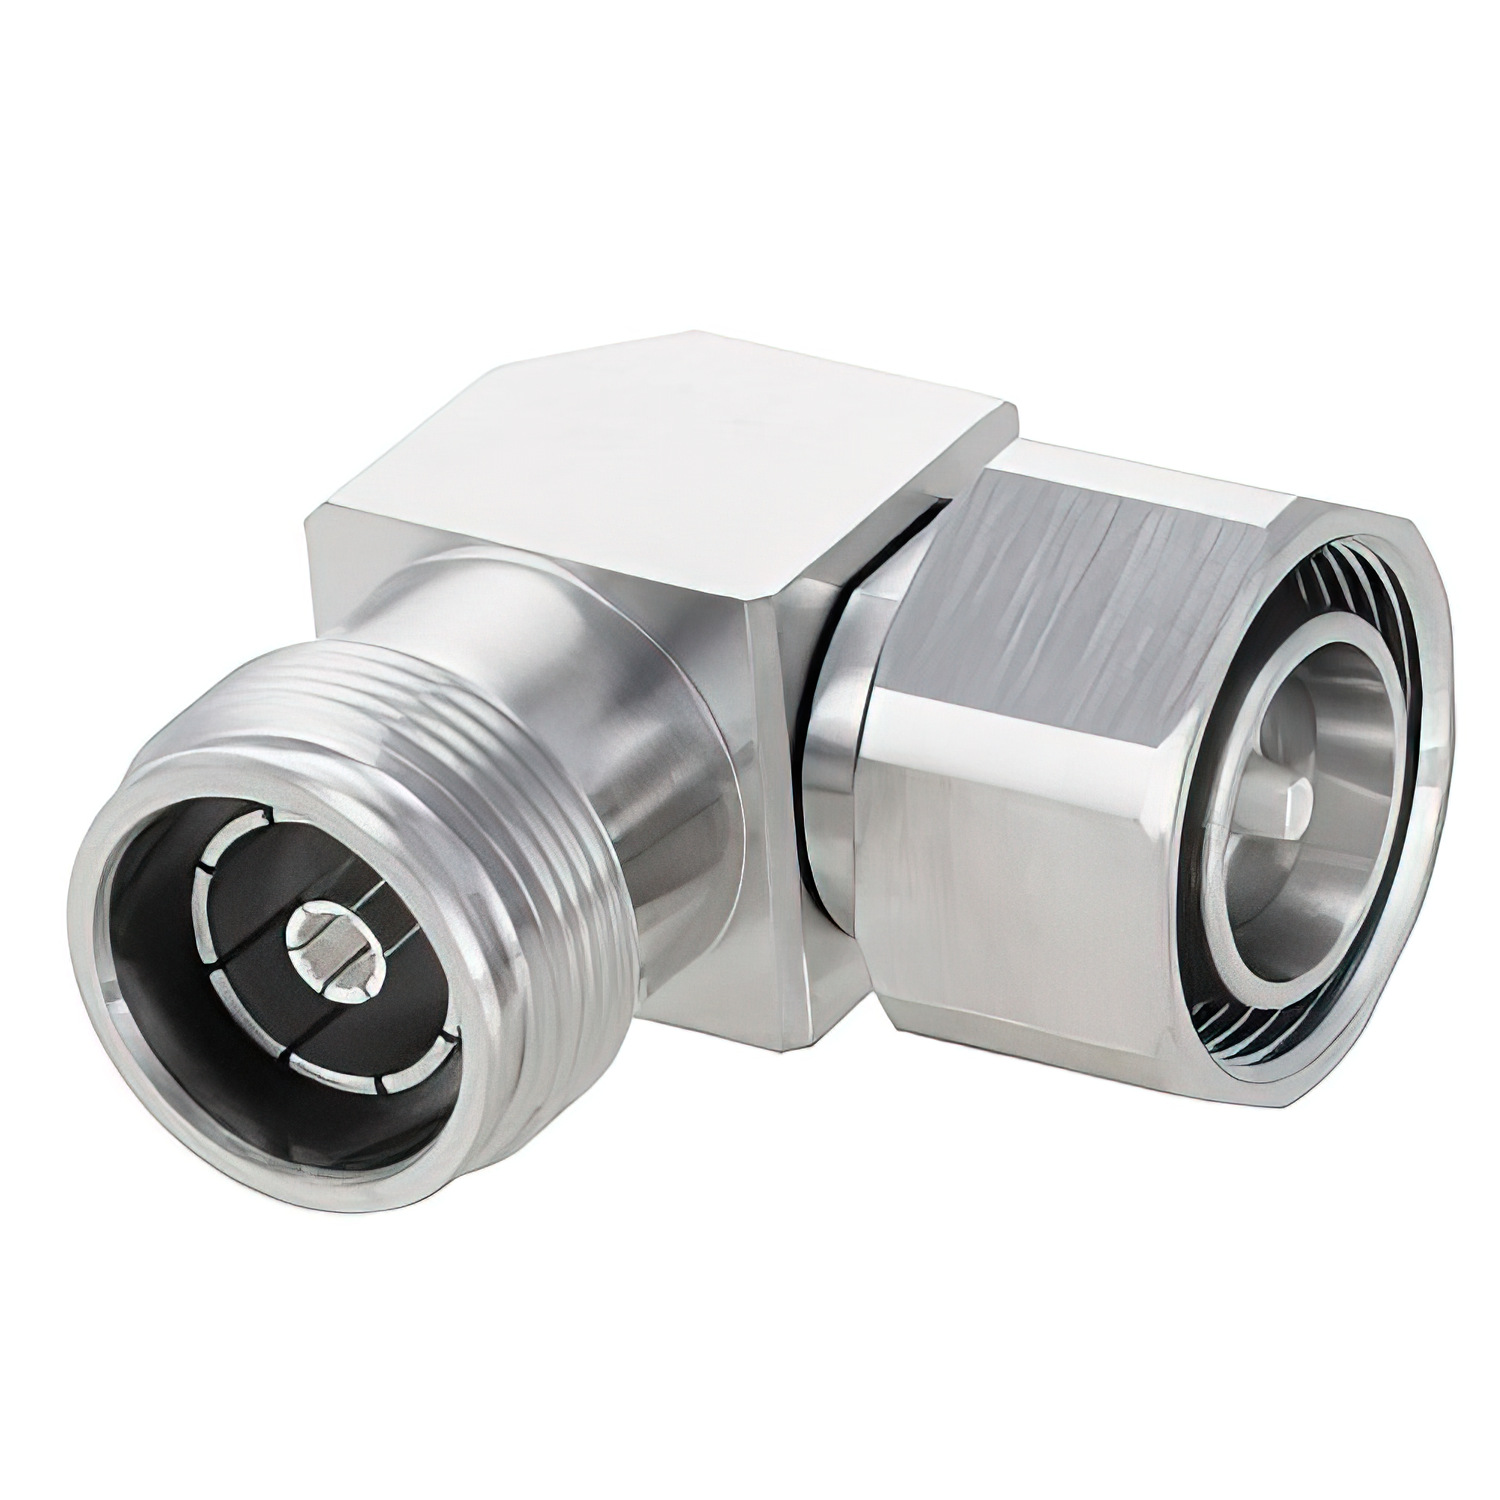 Low PIM 4.3-10 Male to 4.3-10 Female Right Angle Adapter1